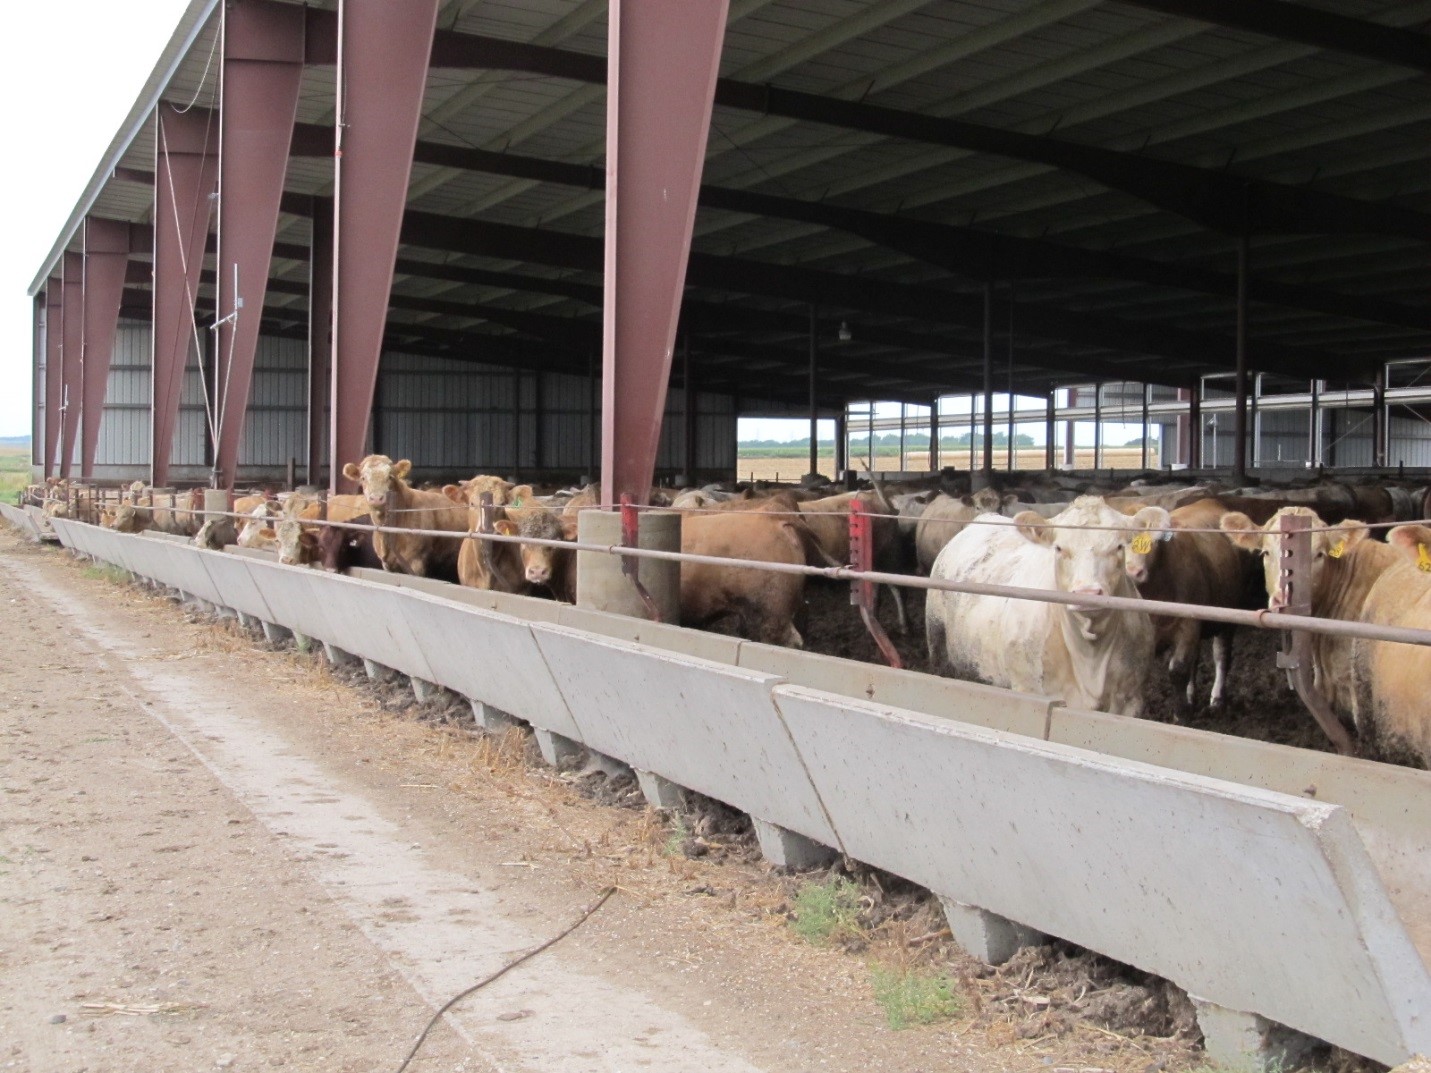 Confinement barns and open lots will need to estimate ammonia emissions and report if exceeding 100 lbs per day.